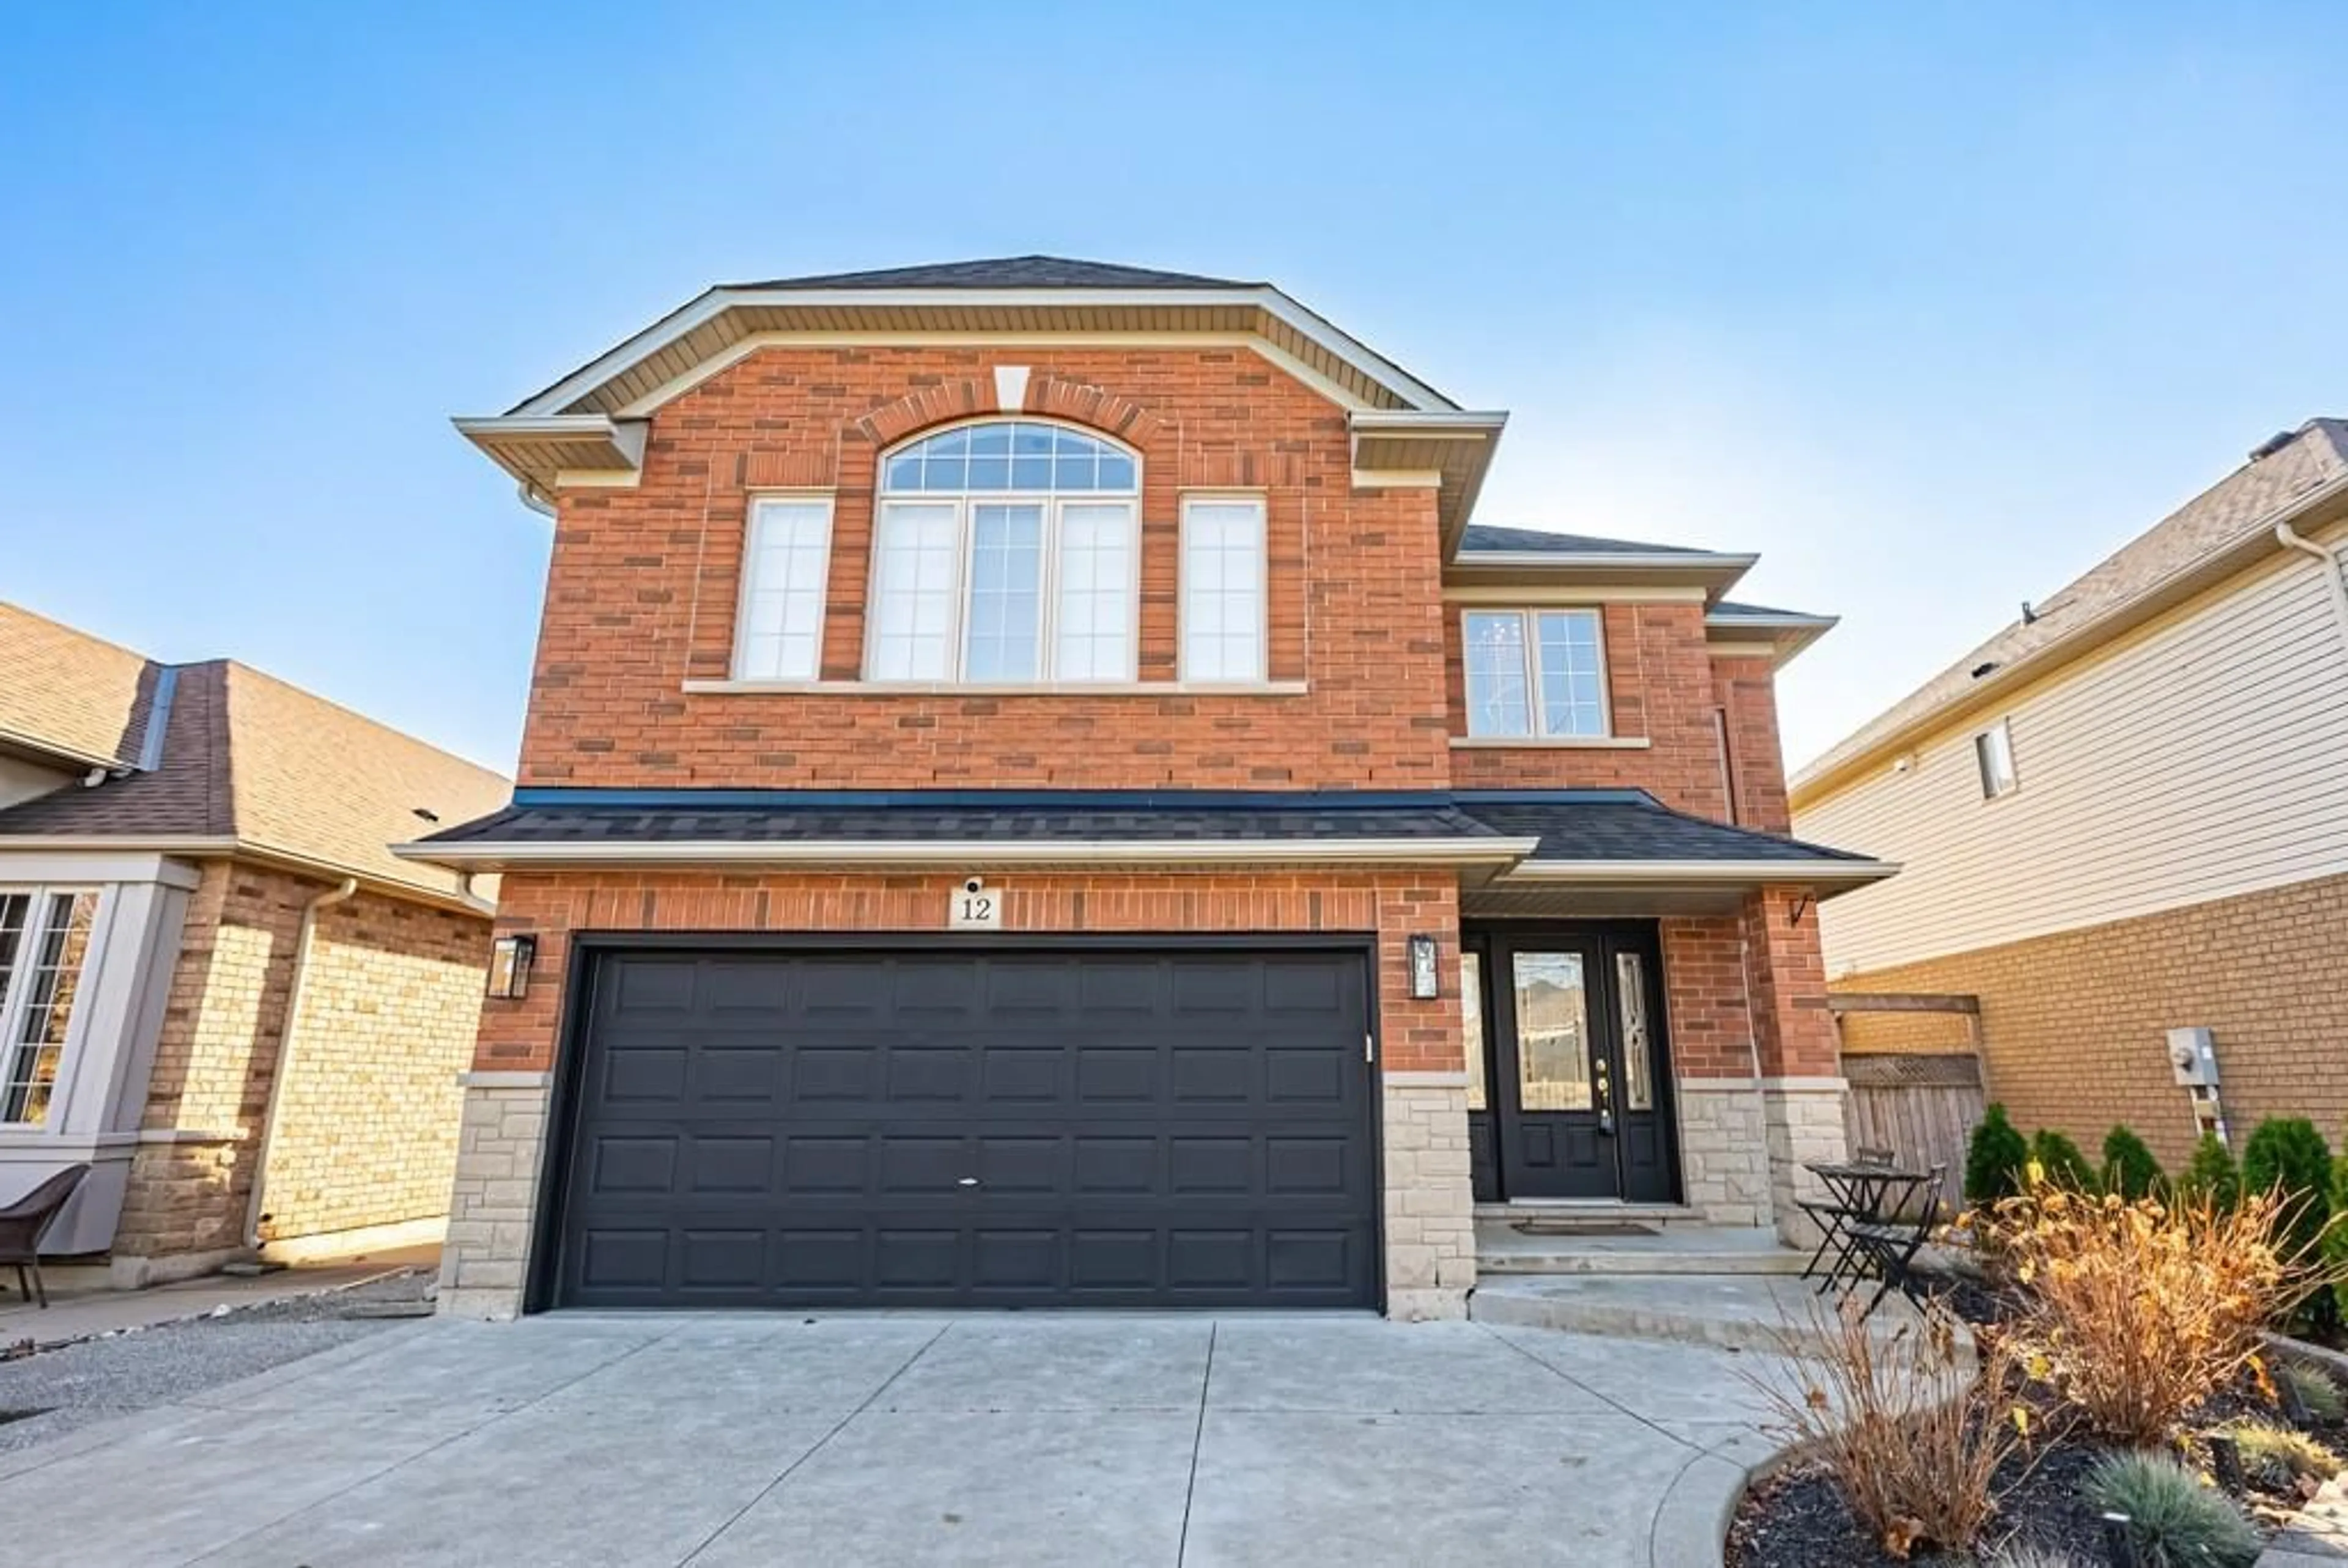 Home with brick exterior material for 12 WILLS Cres, Binbrook Ontario L0R 1C0